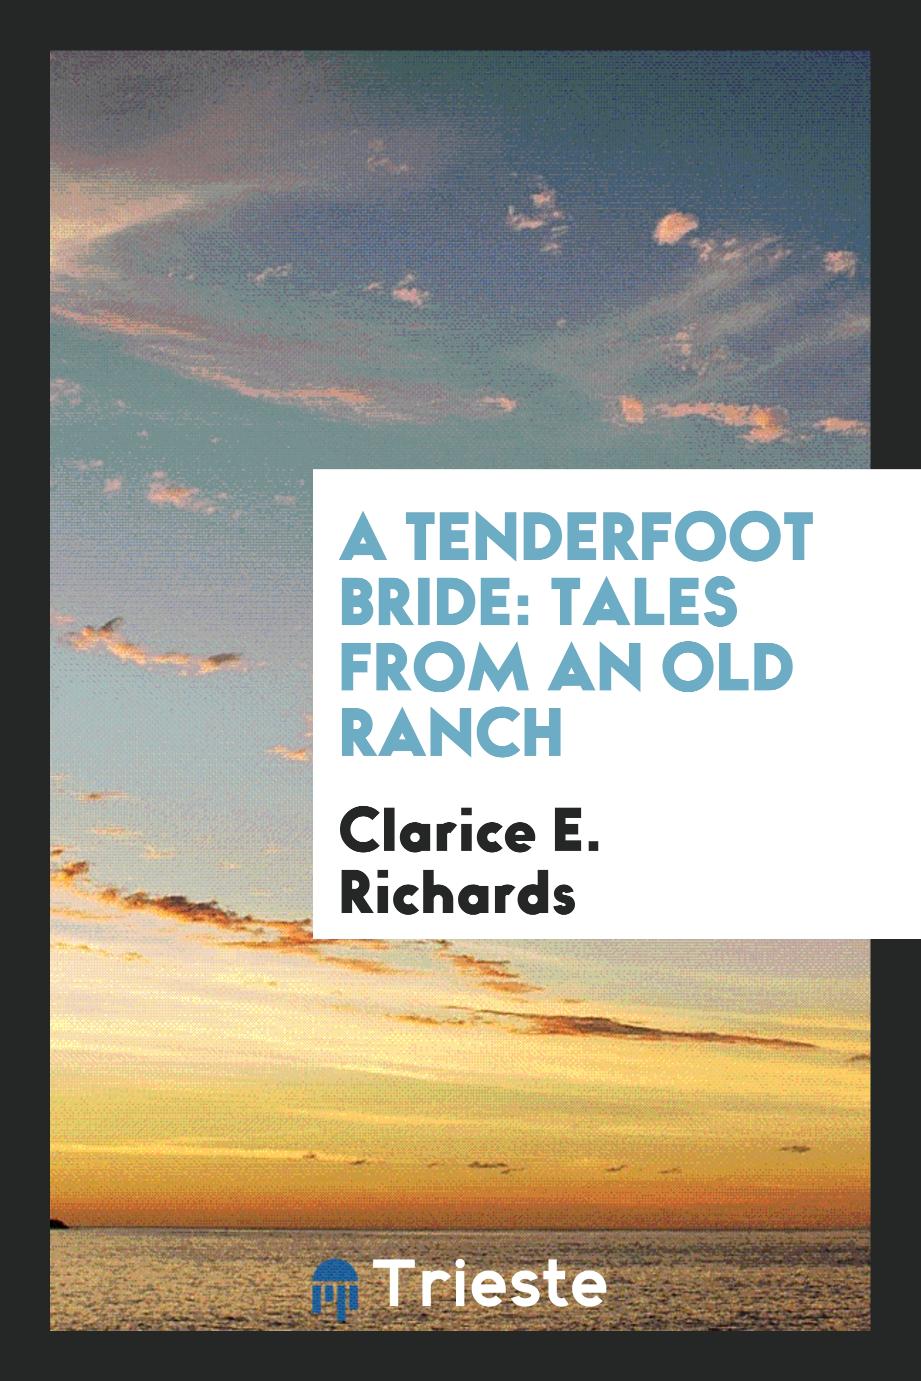 A Tenderfoot Bride: Tales from an Old Ranch